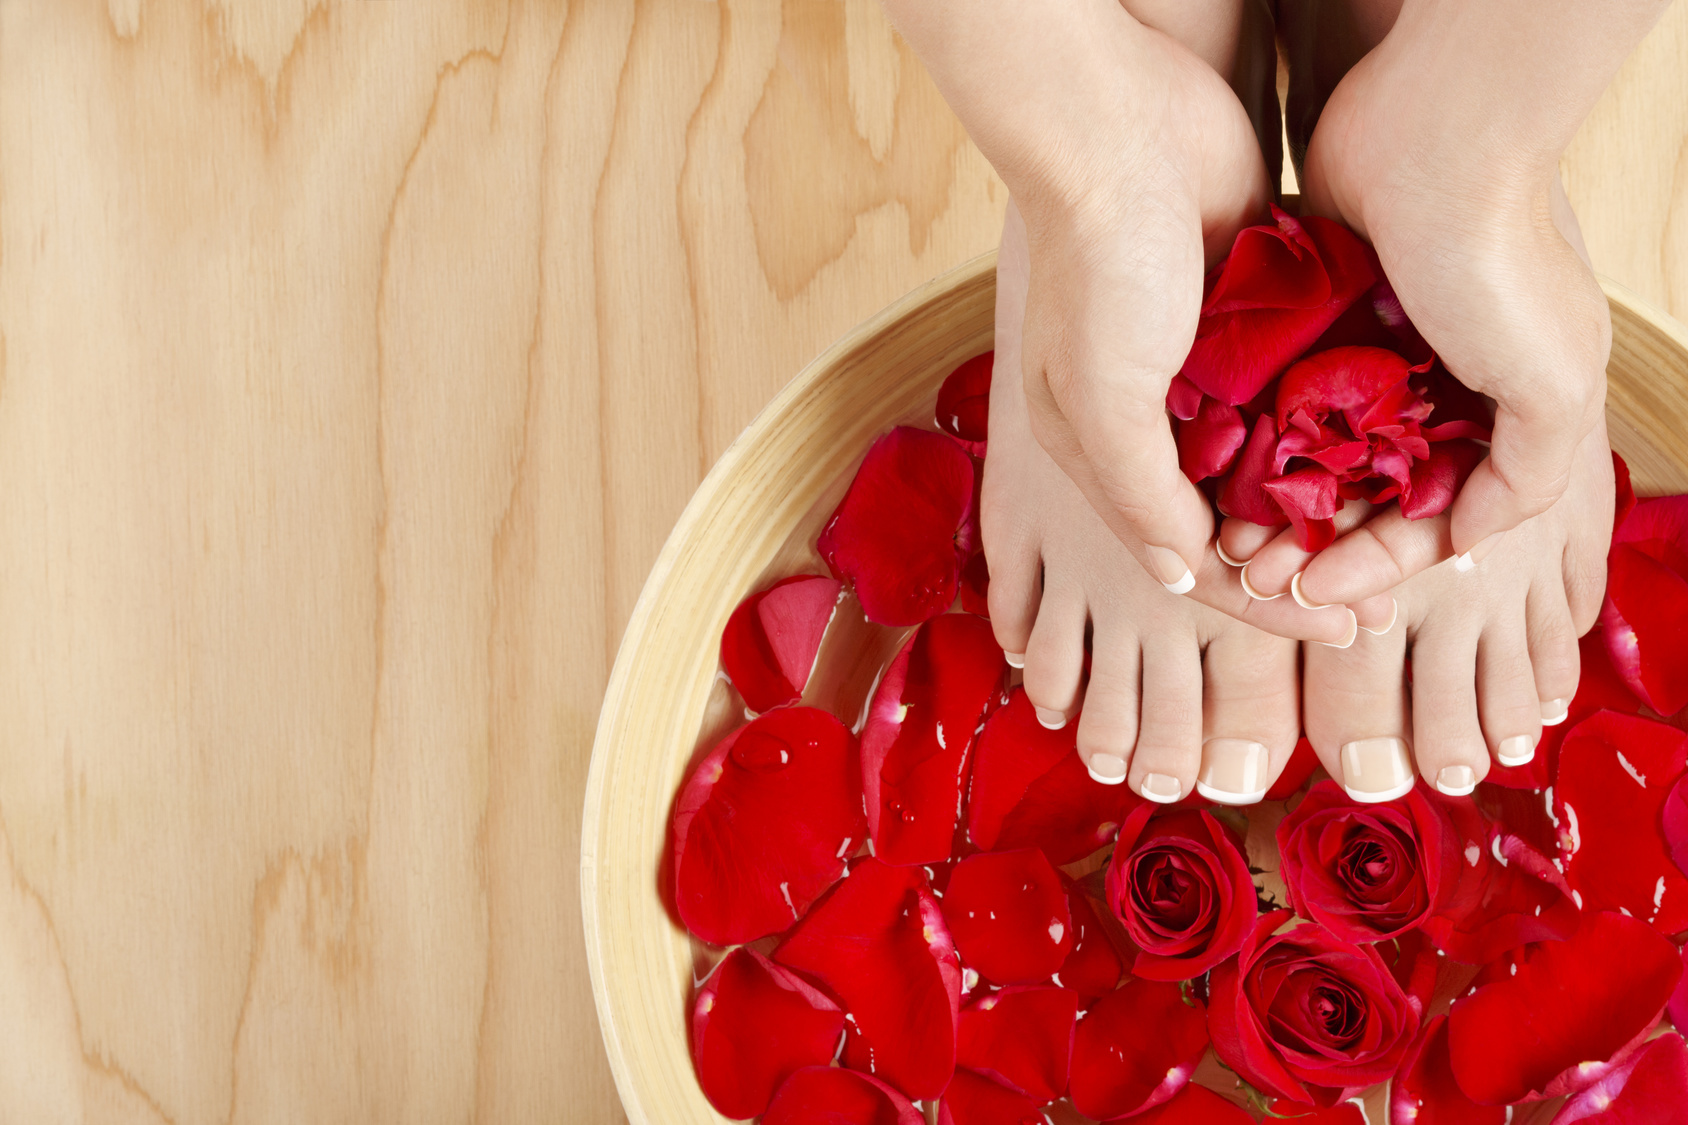 Pedicure Manicure Spa Treatment with Red Roses Wood Background